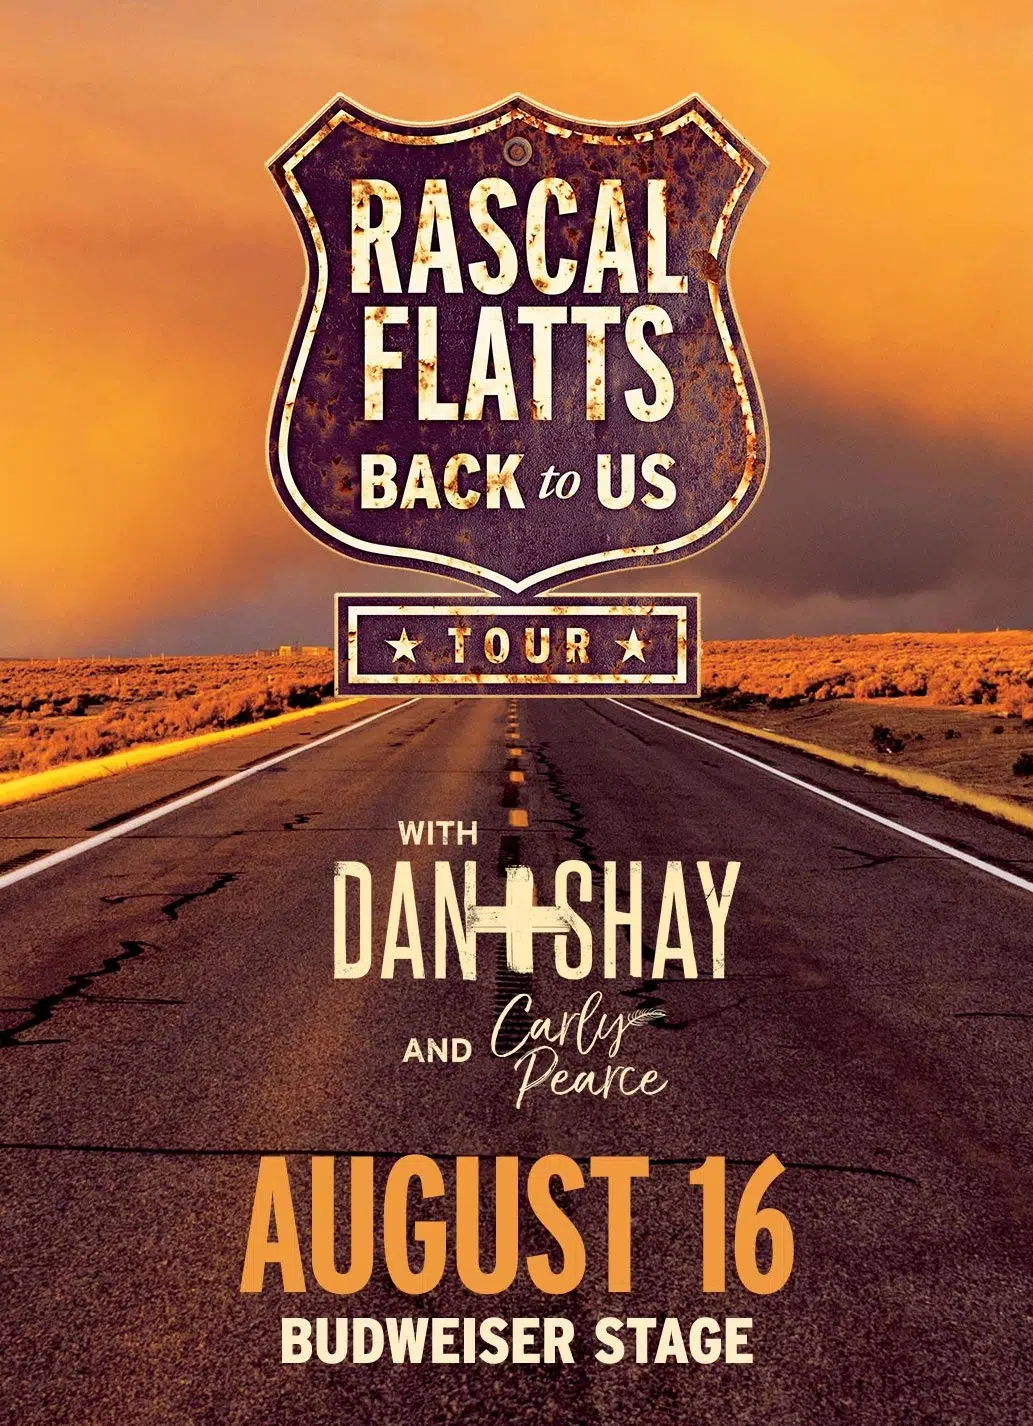 We’re sending FIVE Lucky Listeners to see Rascal Flatts live in concert!